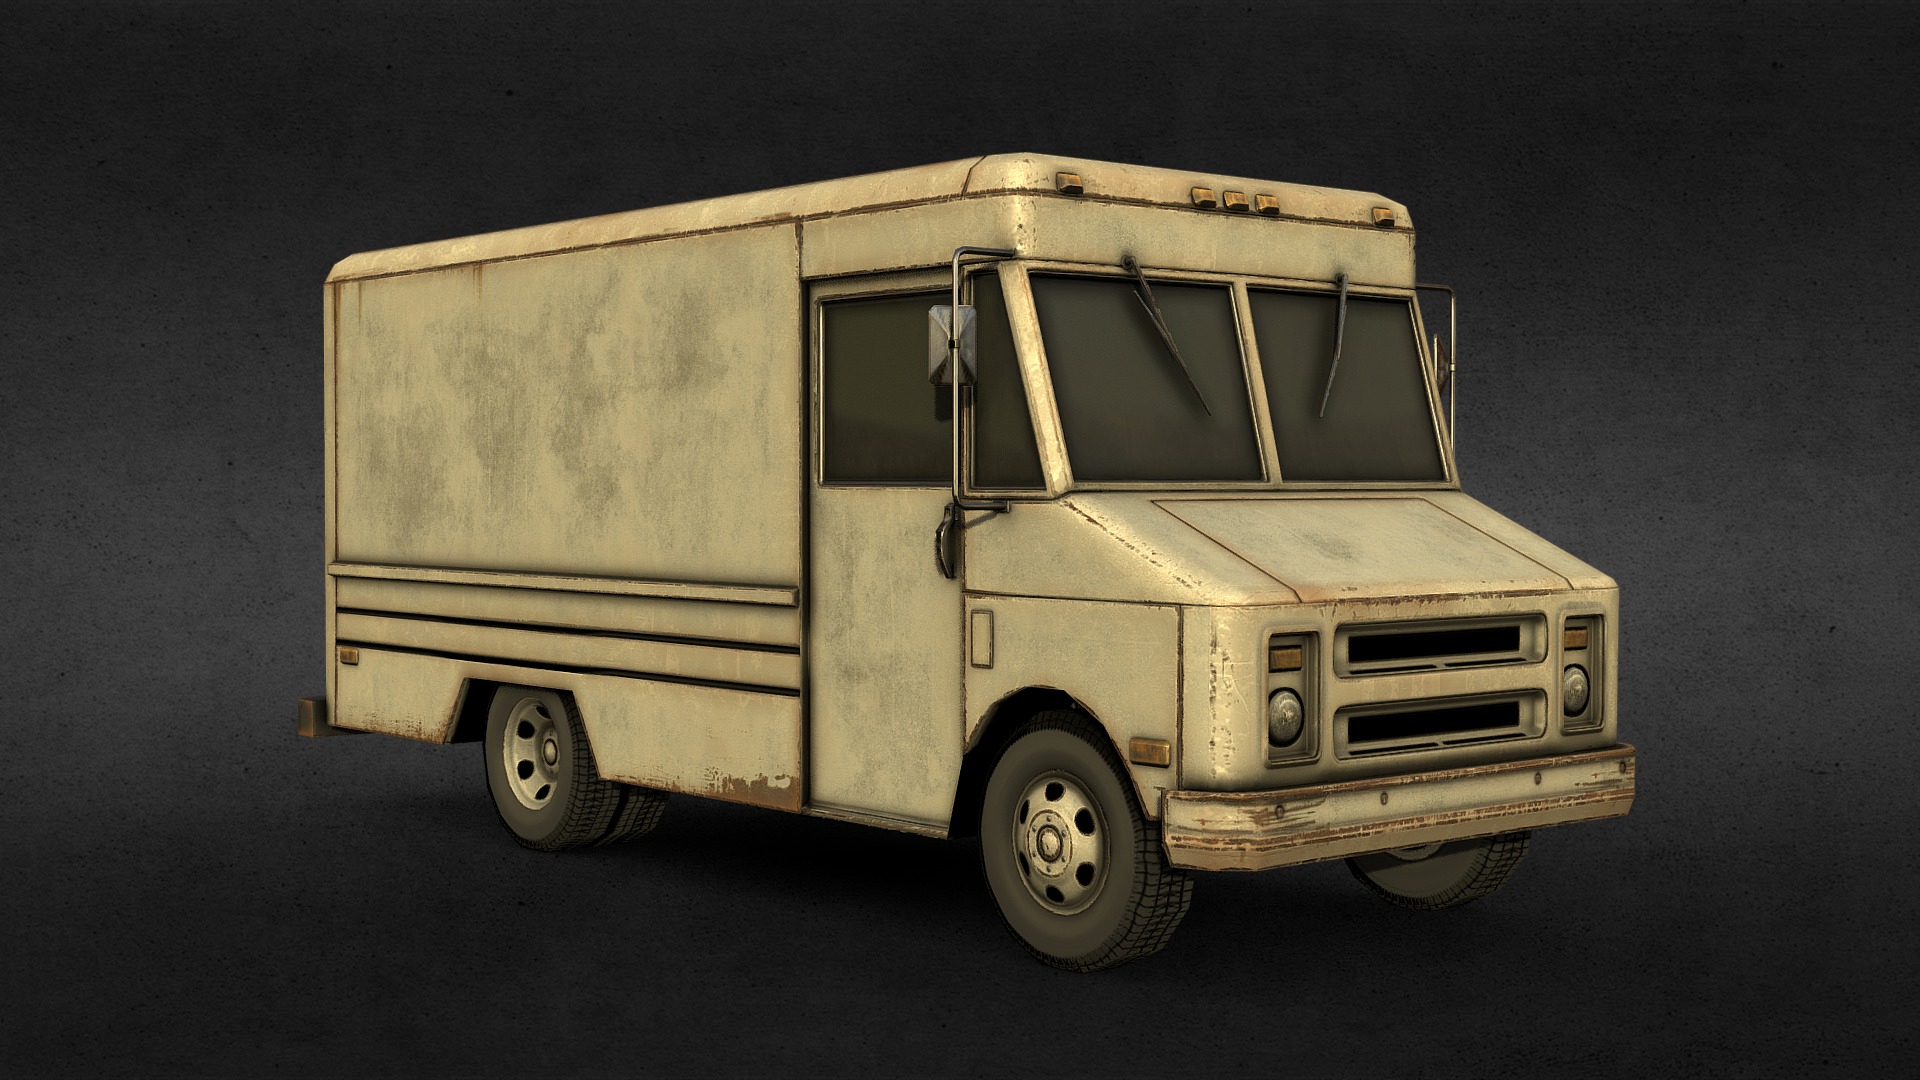 3D model 1979 Step Van - This is a 3D model of the 1979 Step Van. The 3D model is about a silver and gold truck.